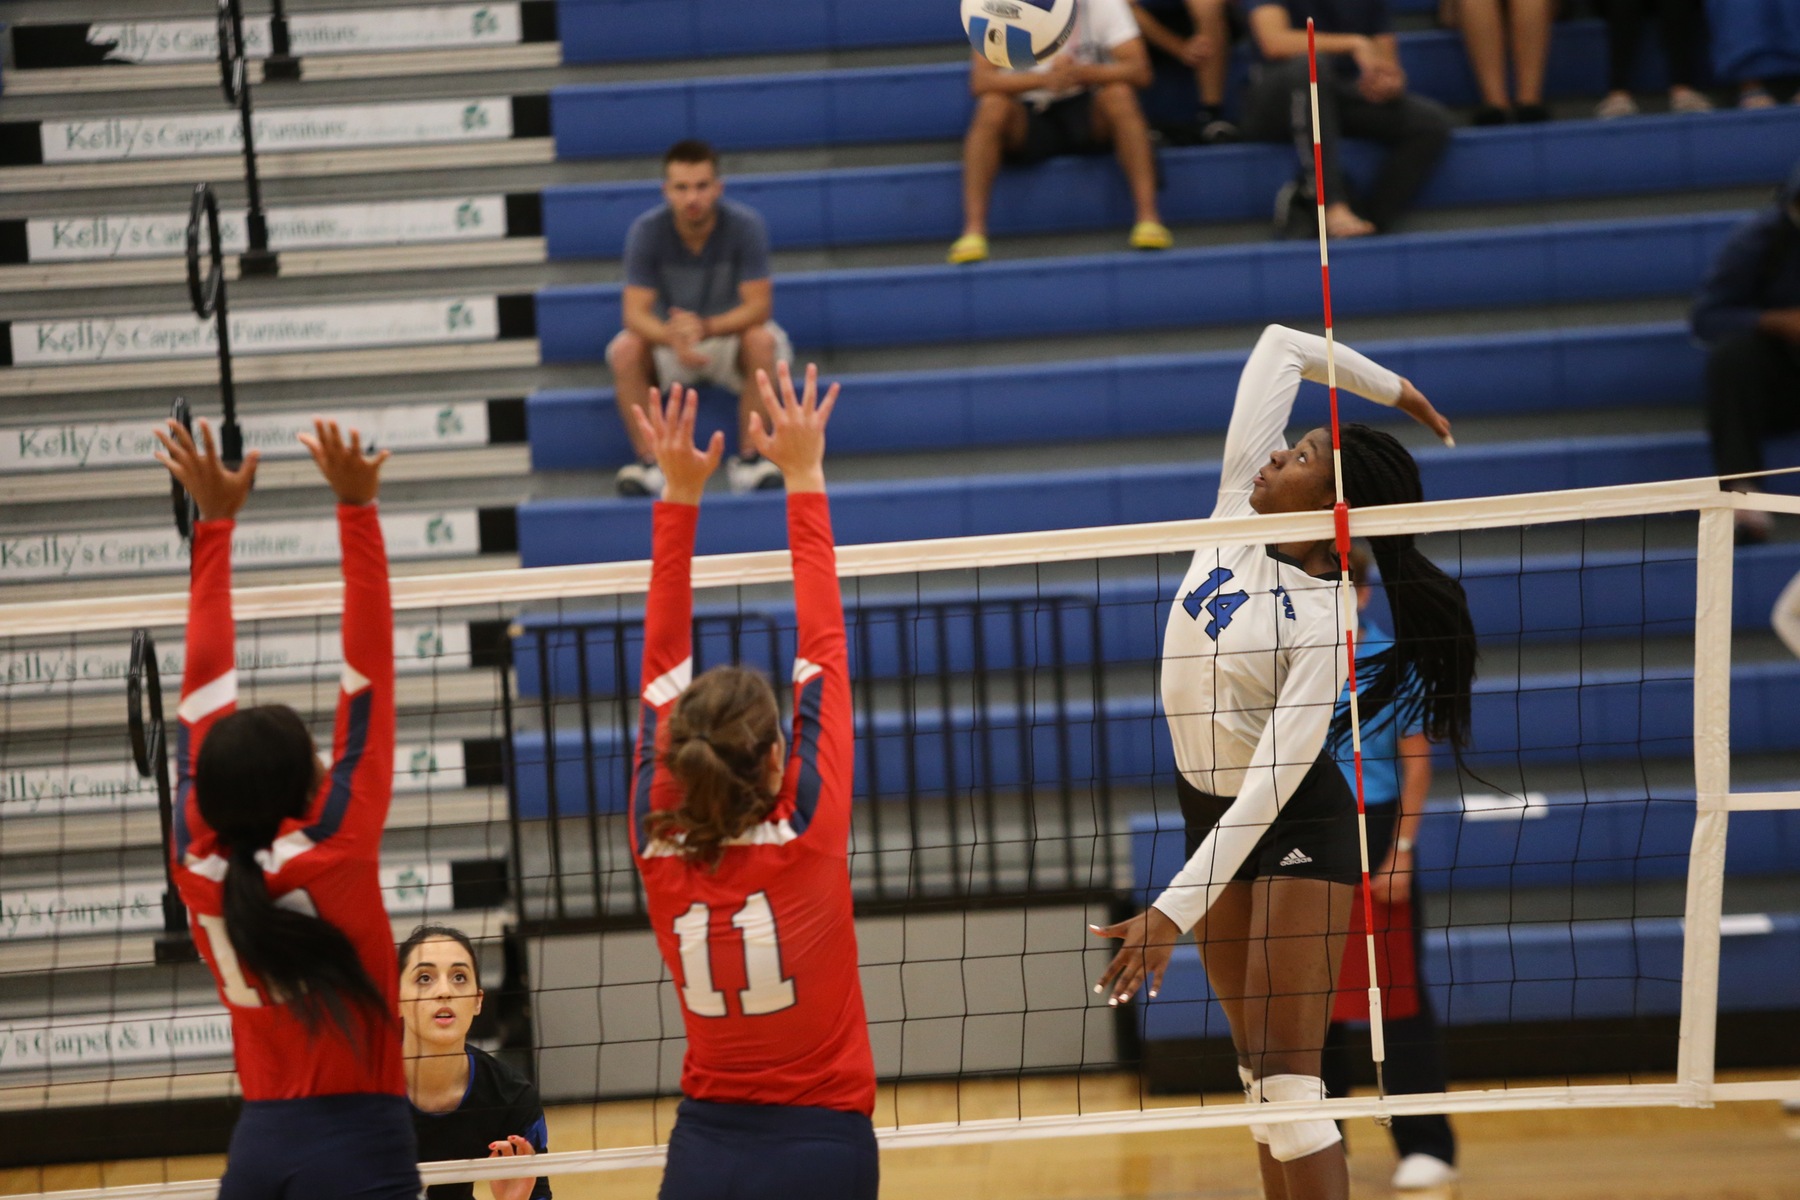 Reivers split on 1st day in Florida, drop match to #1 Miami-Dade